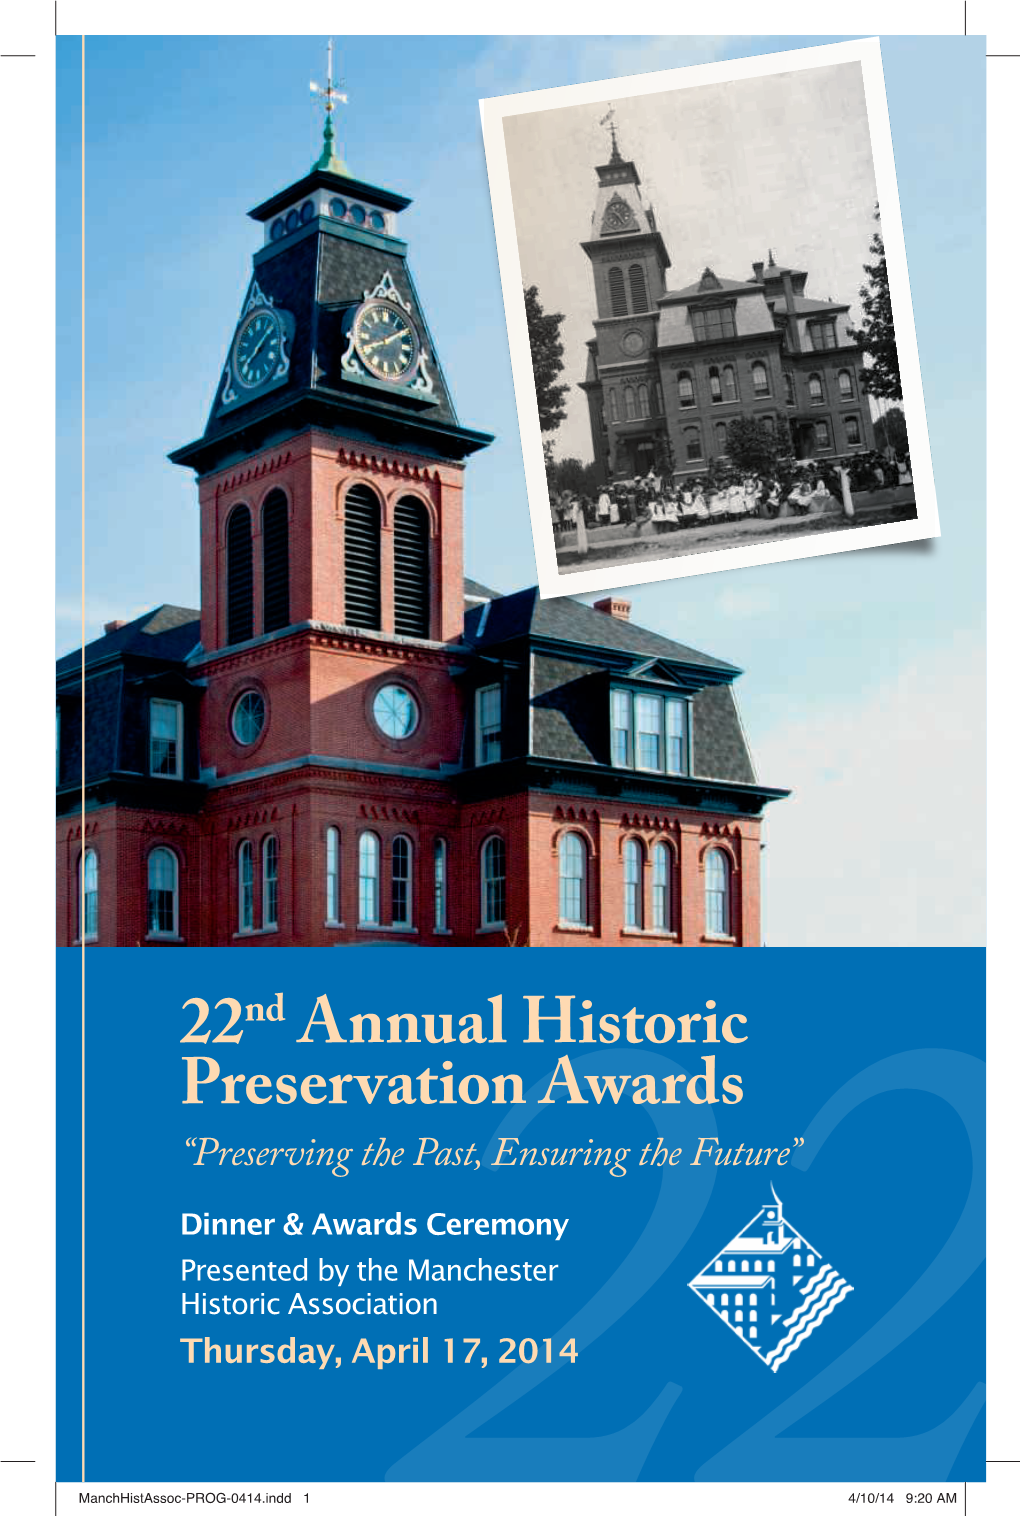 22Nd Annual Historic Preservation Awards “Preserving the Past, Ensuring the Future” Dinner & Awards Ceremony